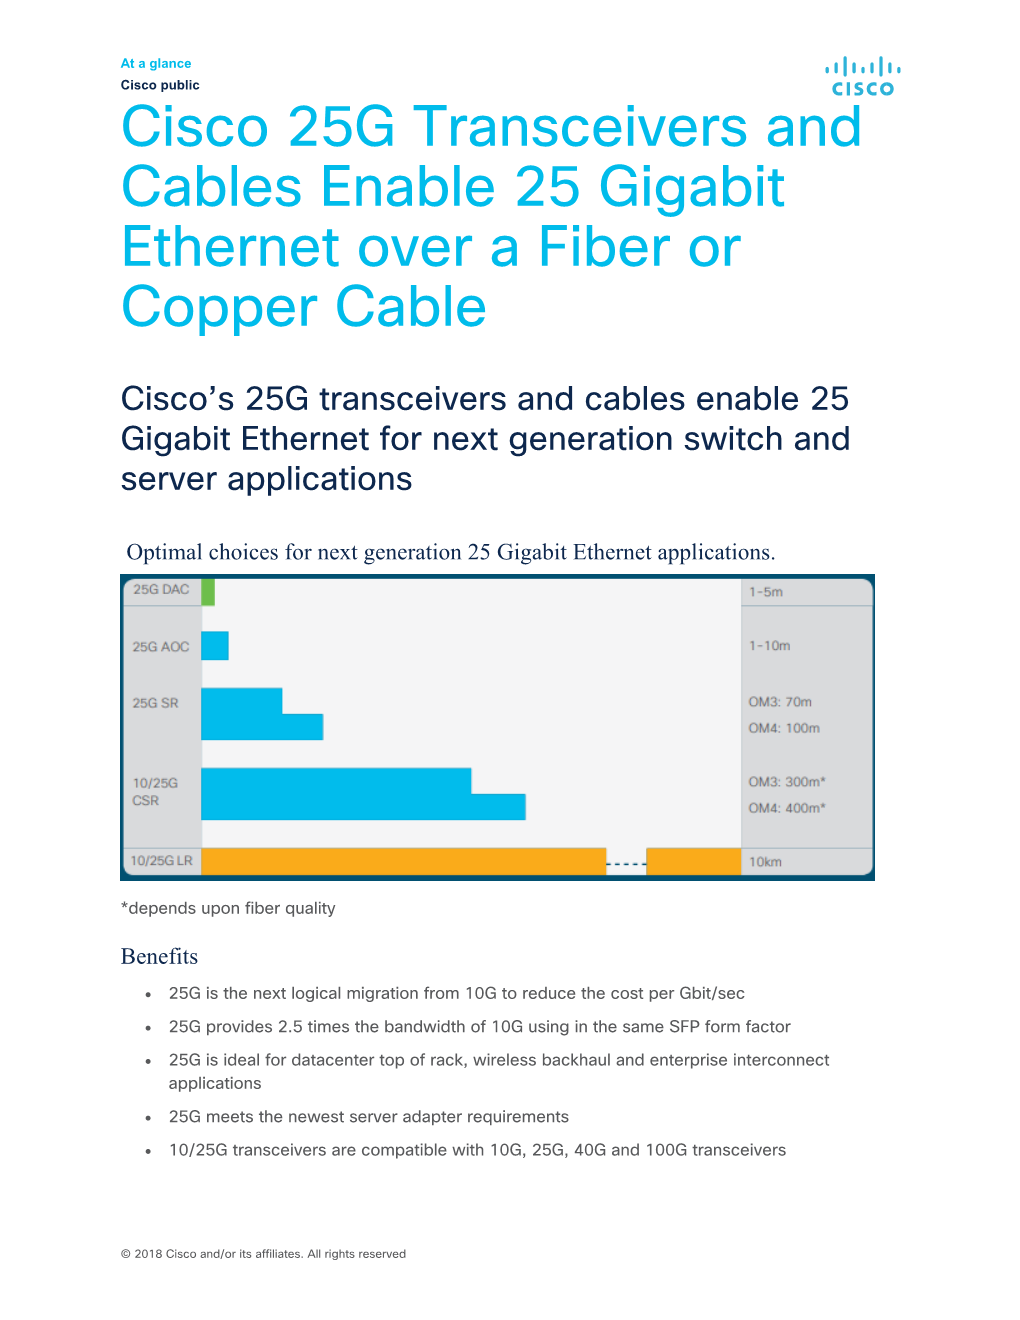 Cisco 25G Transceivers and Cables Enable 25 Gigabit Ethernet Over a Fiber Or Copper Cable